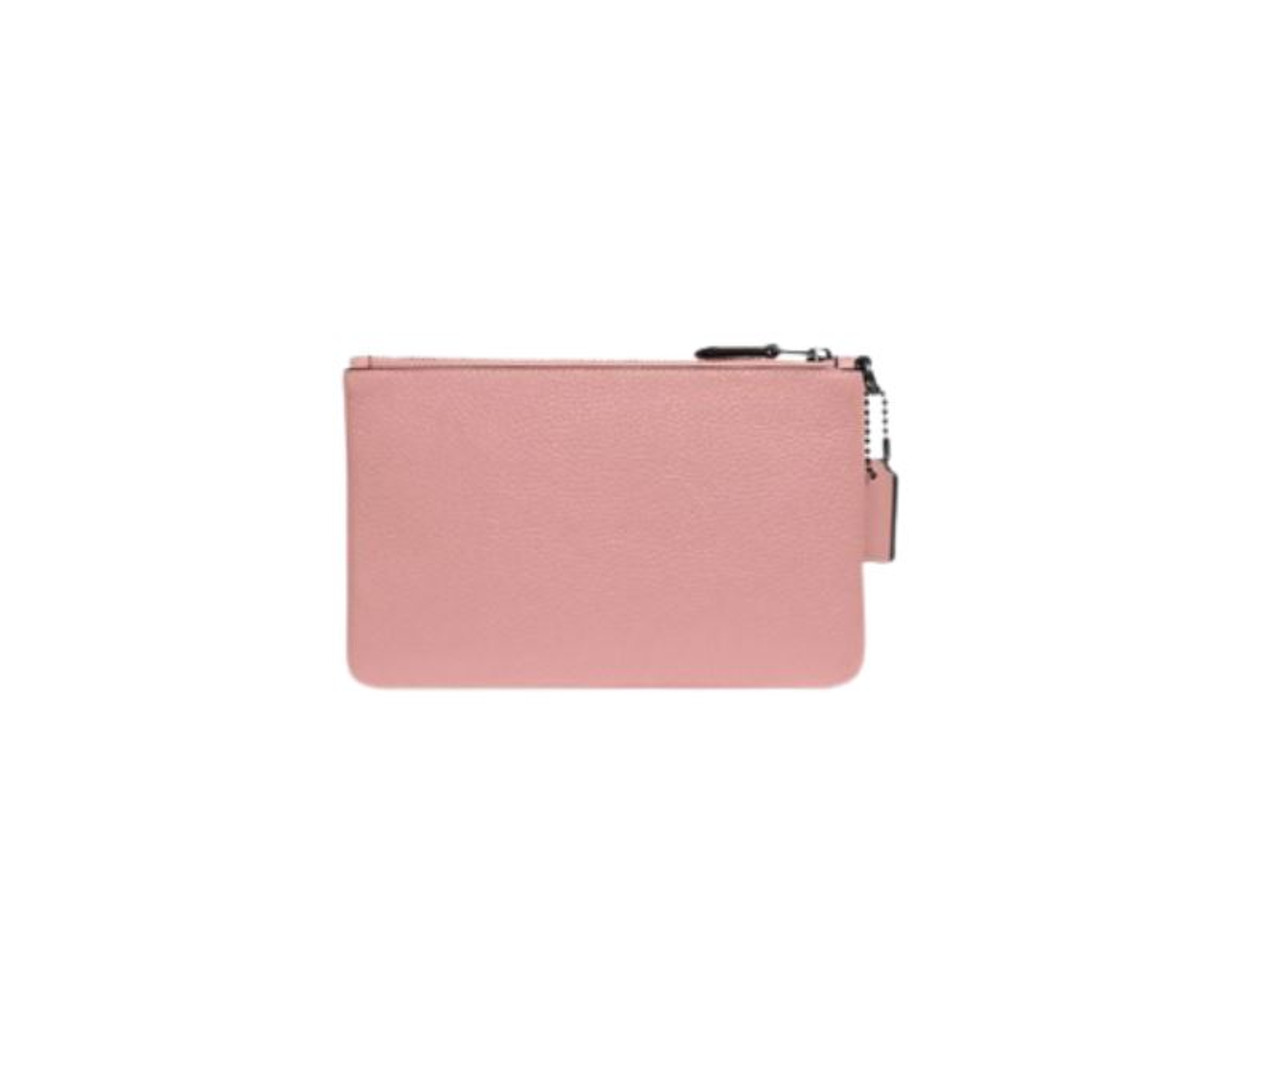 Coach Wristlet Small Wallet Pebbled Leather Watermelon 22952 Bag